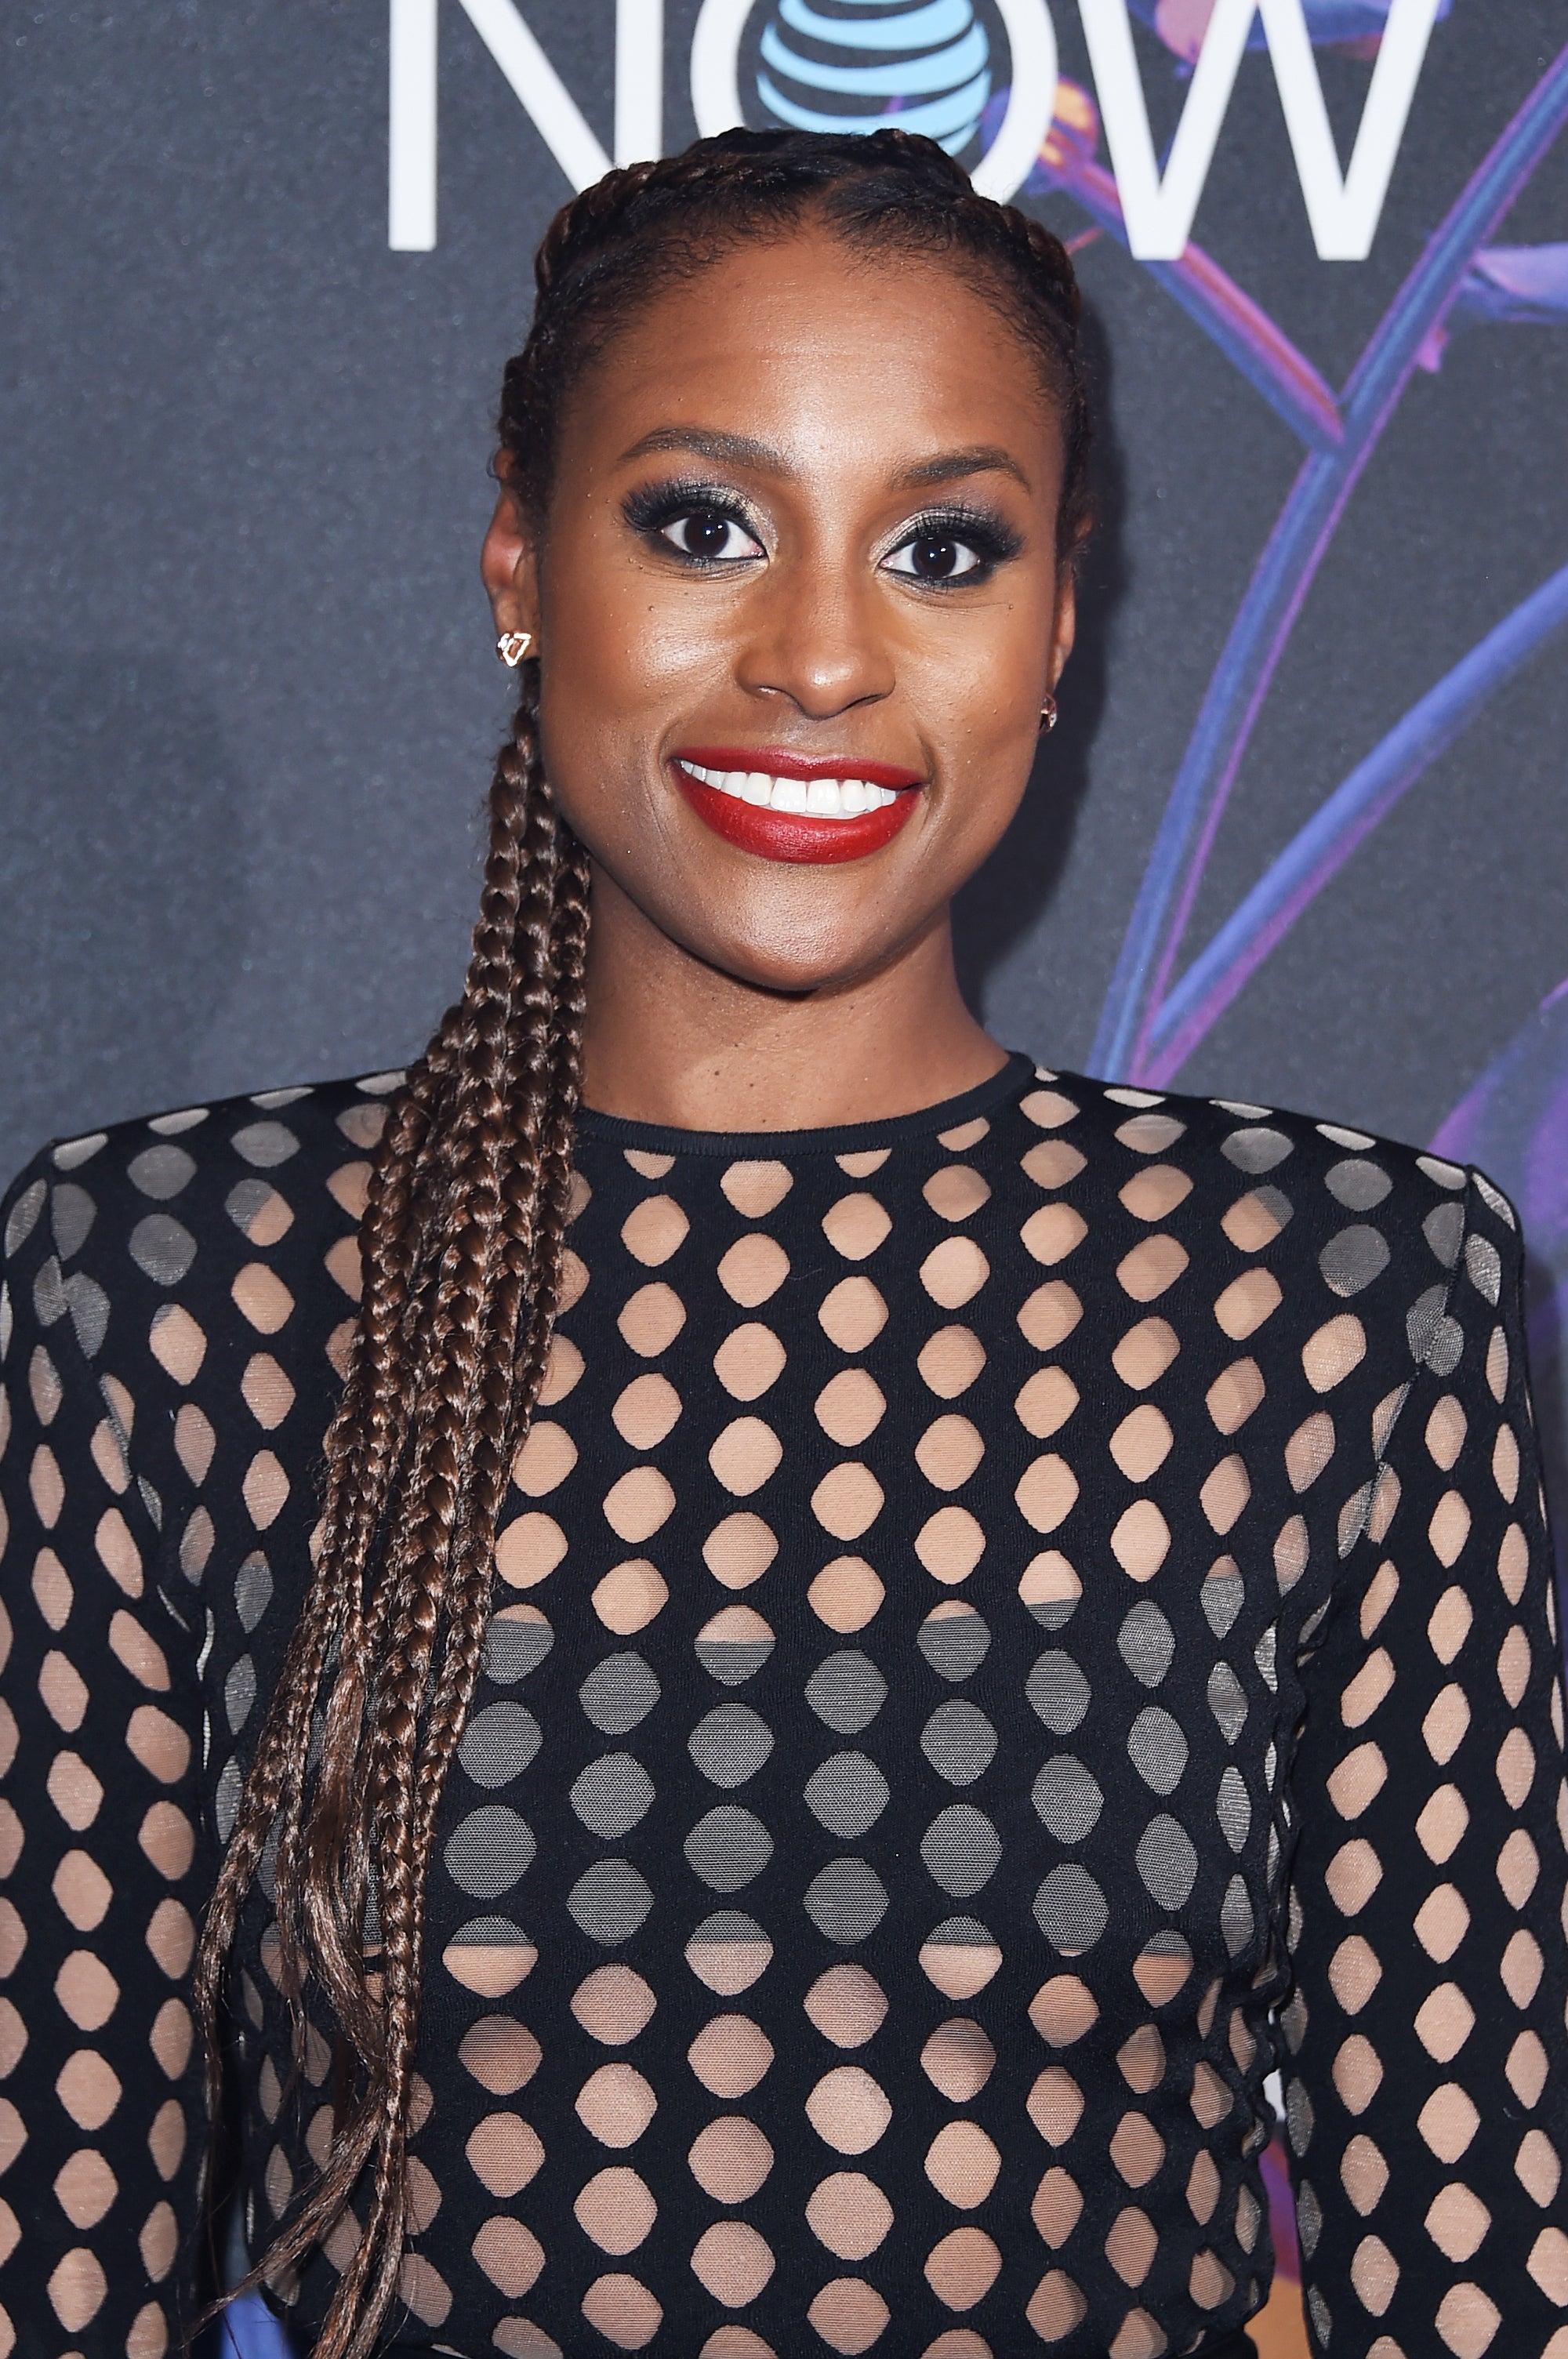 These Celebs Are Serving Up Major Braid-Inspo on the Red Carpet
